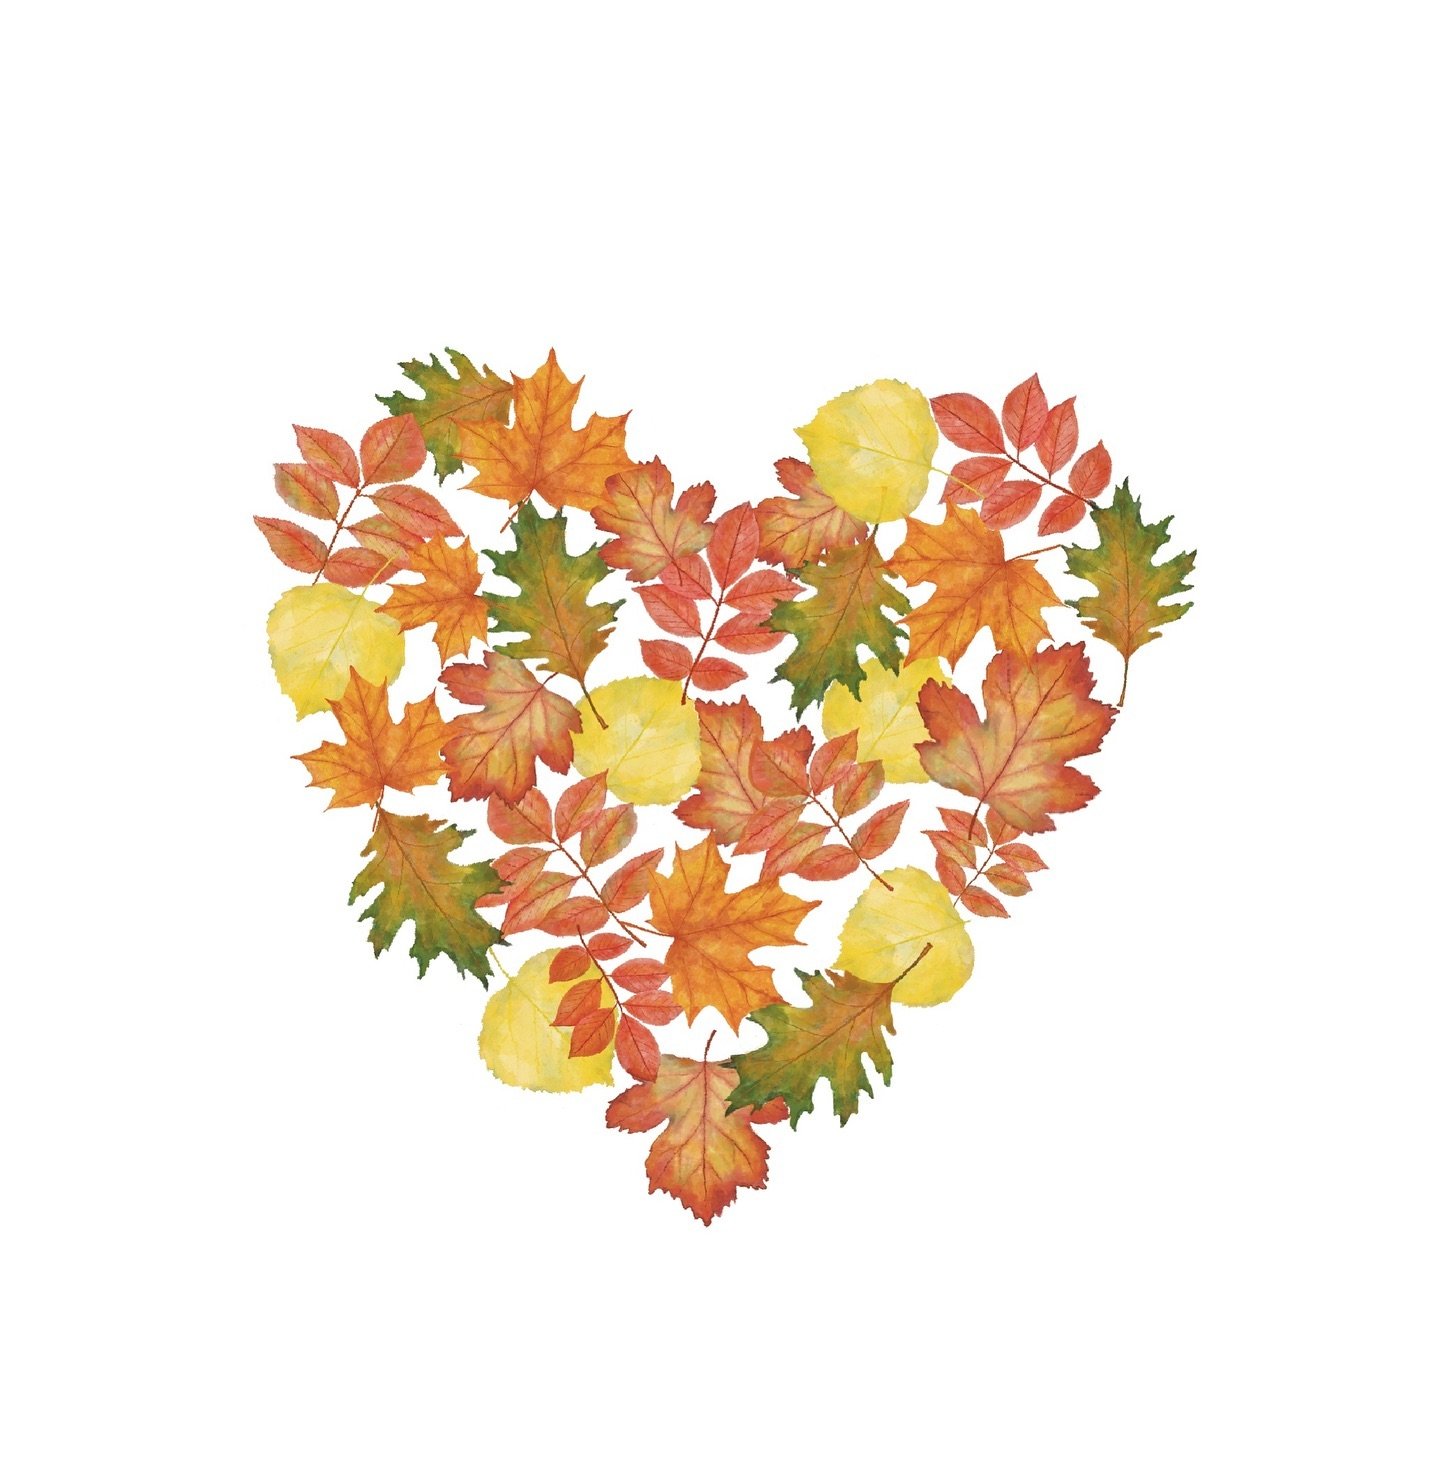 Sending some Autumnal love you way.

I hope you find time to 

-  curl up on the couch with a good book 

- chat with a dear friend over coffee

- head out for a hike and breathe in some fresh air

- take note of the  beautiful Autumn colours

- put 